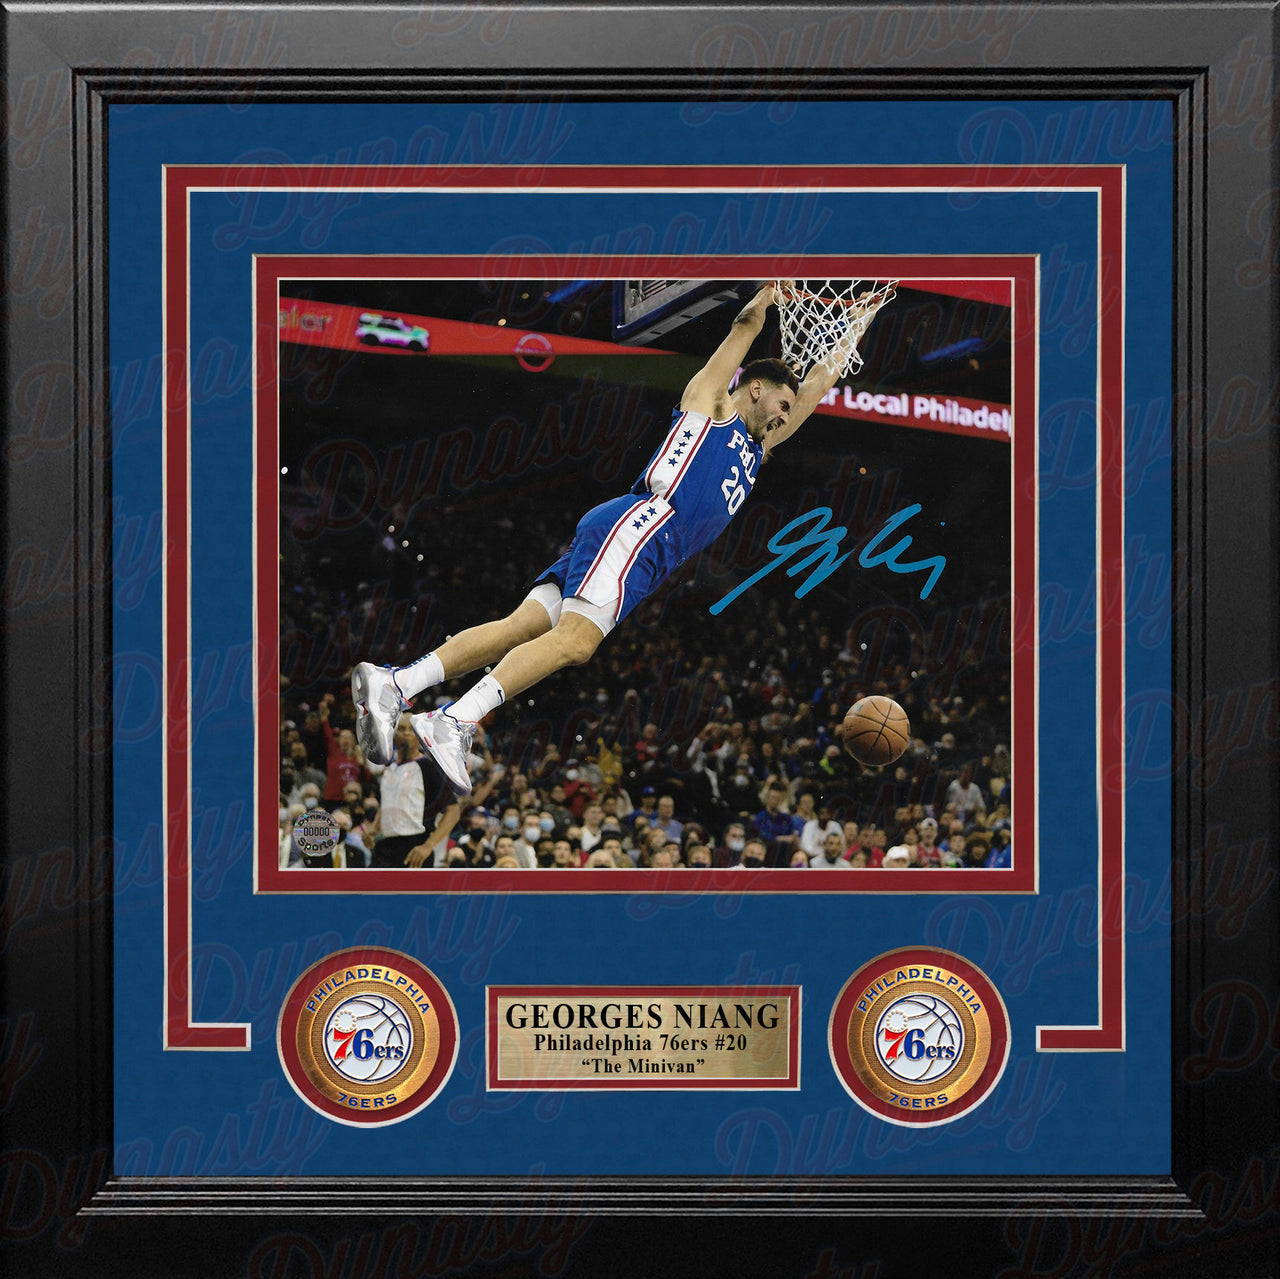 Georges Niang in Action Philadelphia 76ers Autographed Framed Basketball Photo - Dynasty Sports & Framing 